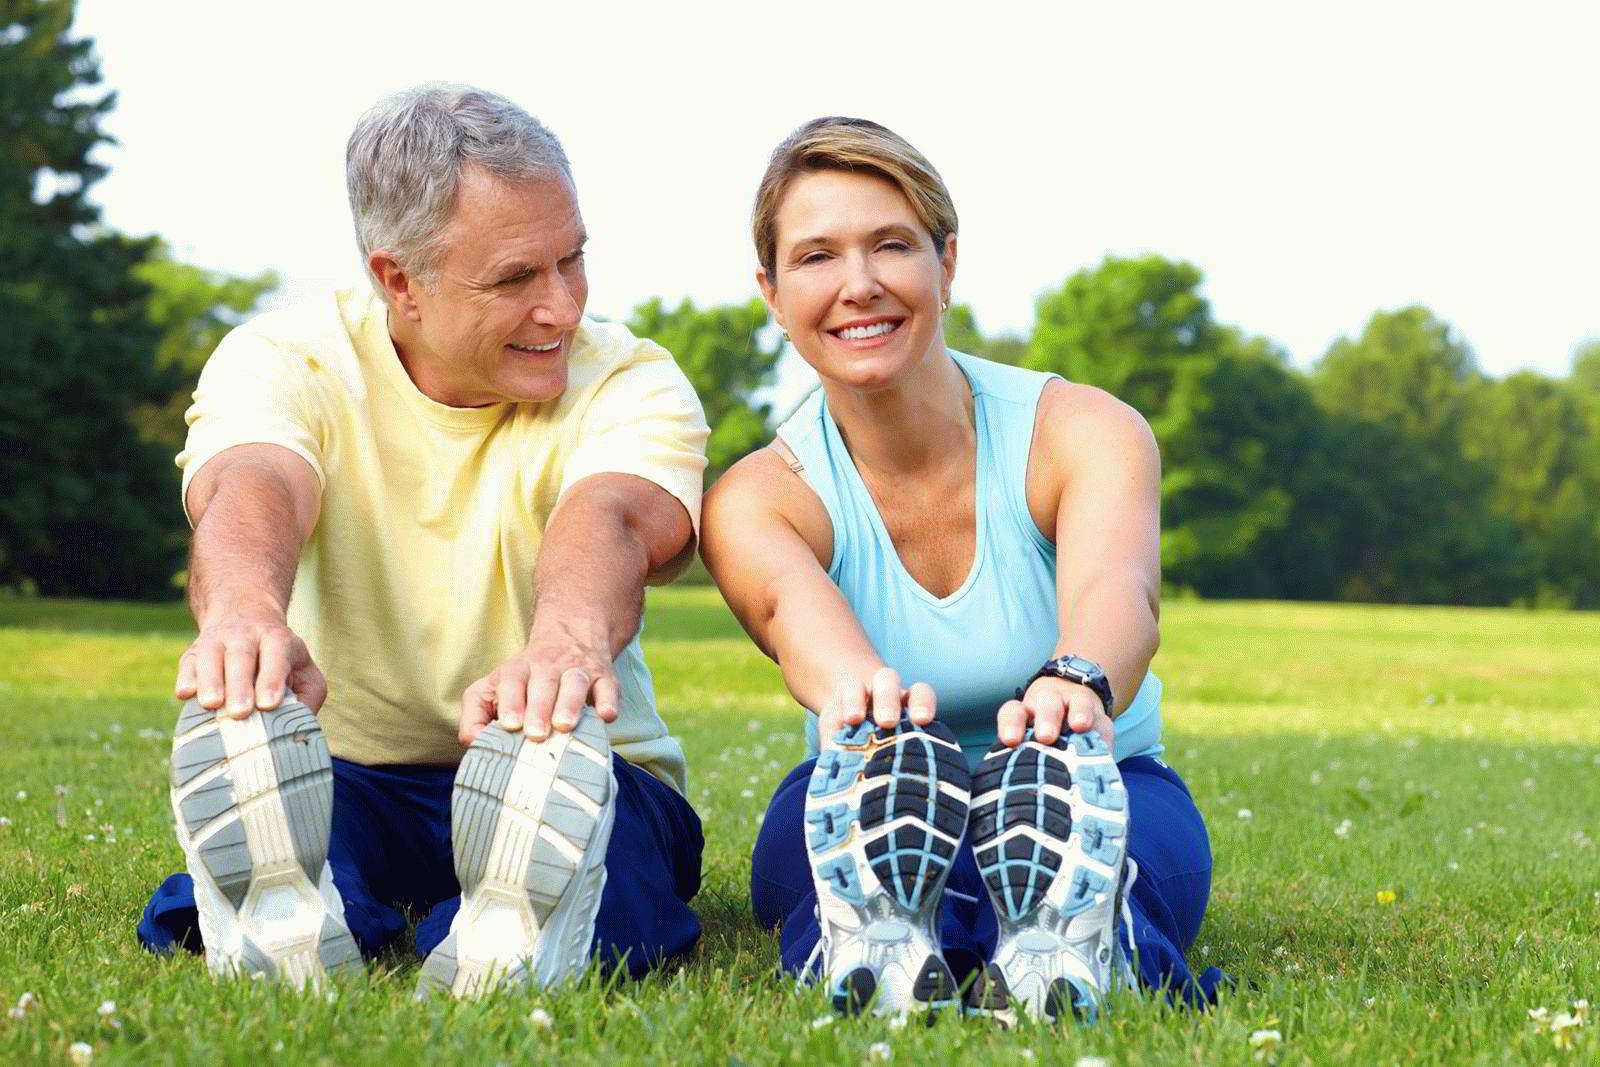 What sports can you do at 40-45 years old for your health